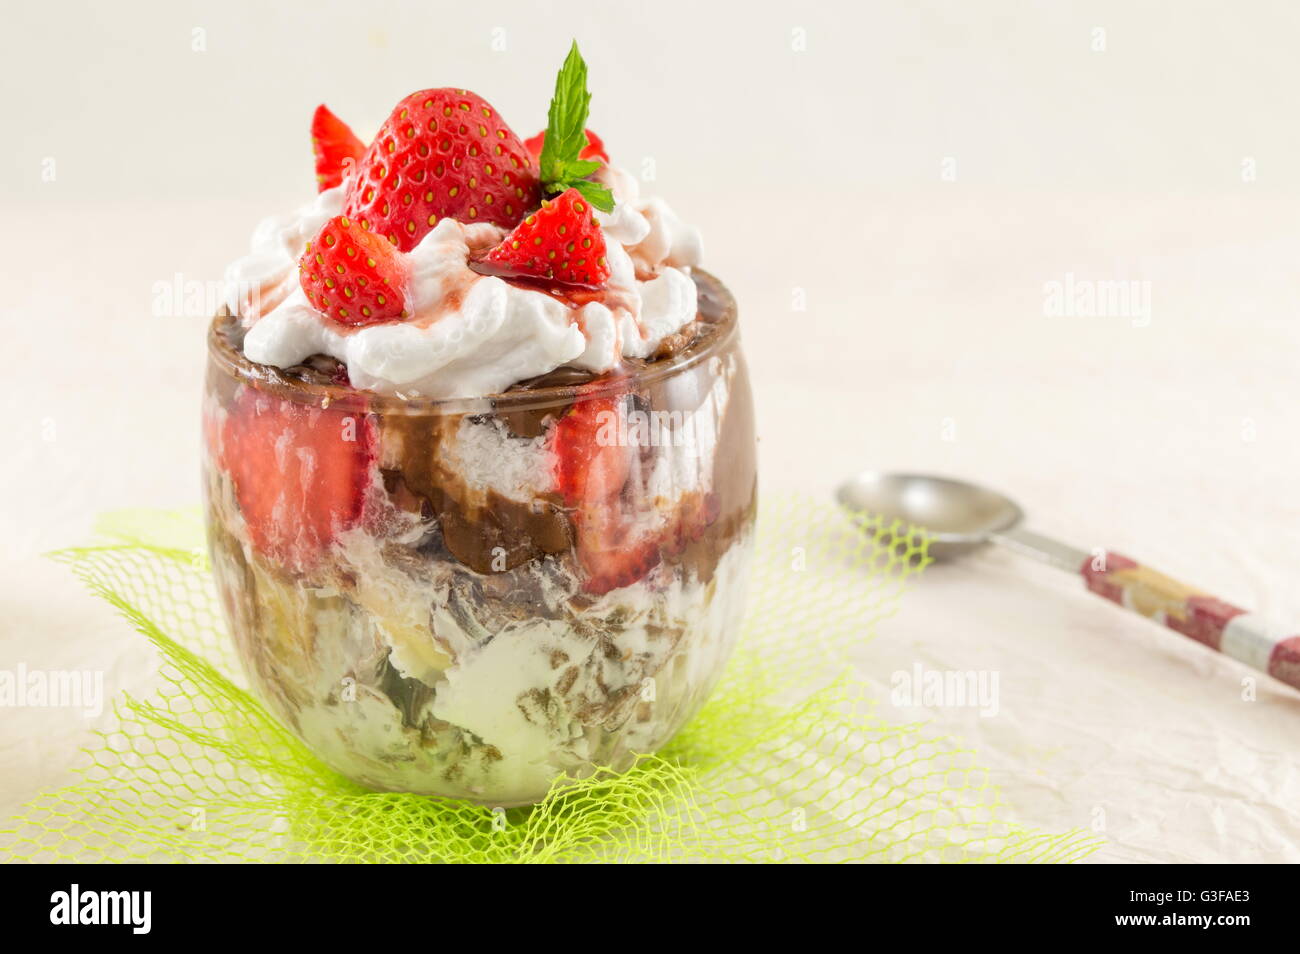 Strawberry parfait in a glass and fresh strawberries Stock Photo